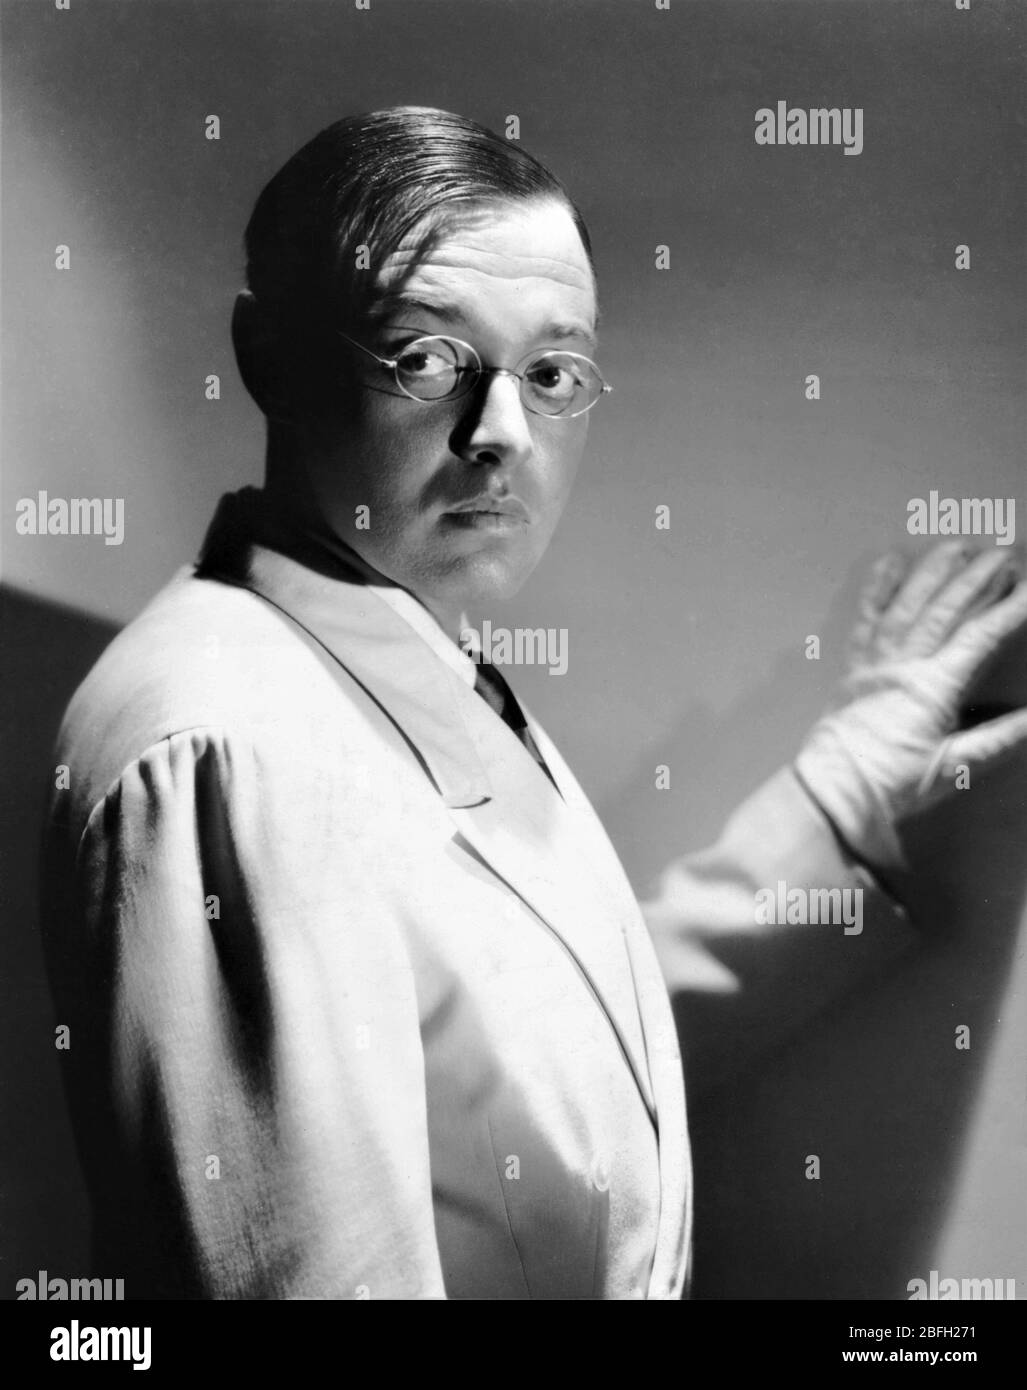 PETER LORRE Portrait as Mr. Moto in THANK YOU, MR. MOTO 1937 director  NORMAN FOSTER based on a story by John P. Marquand Twentieth Century Fox  Stock Photo - Alamy